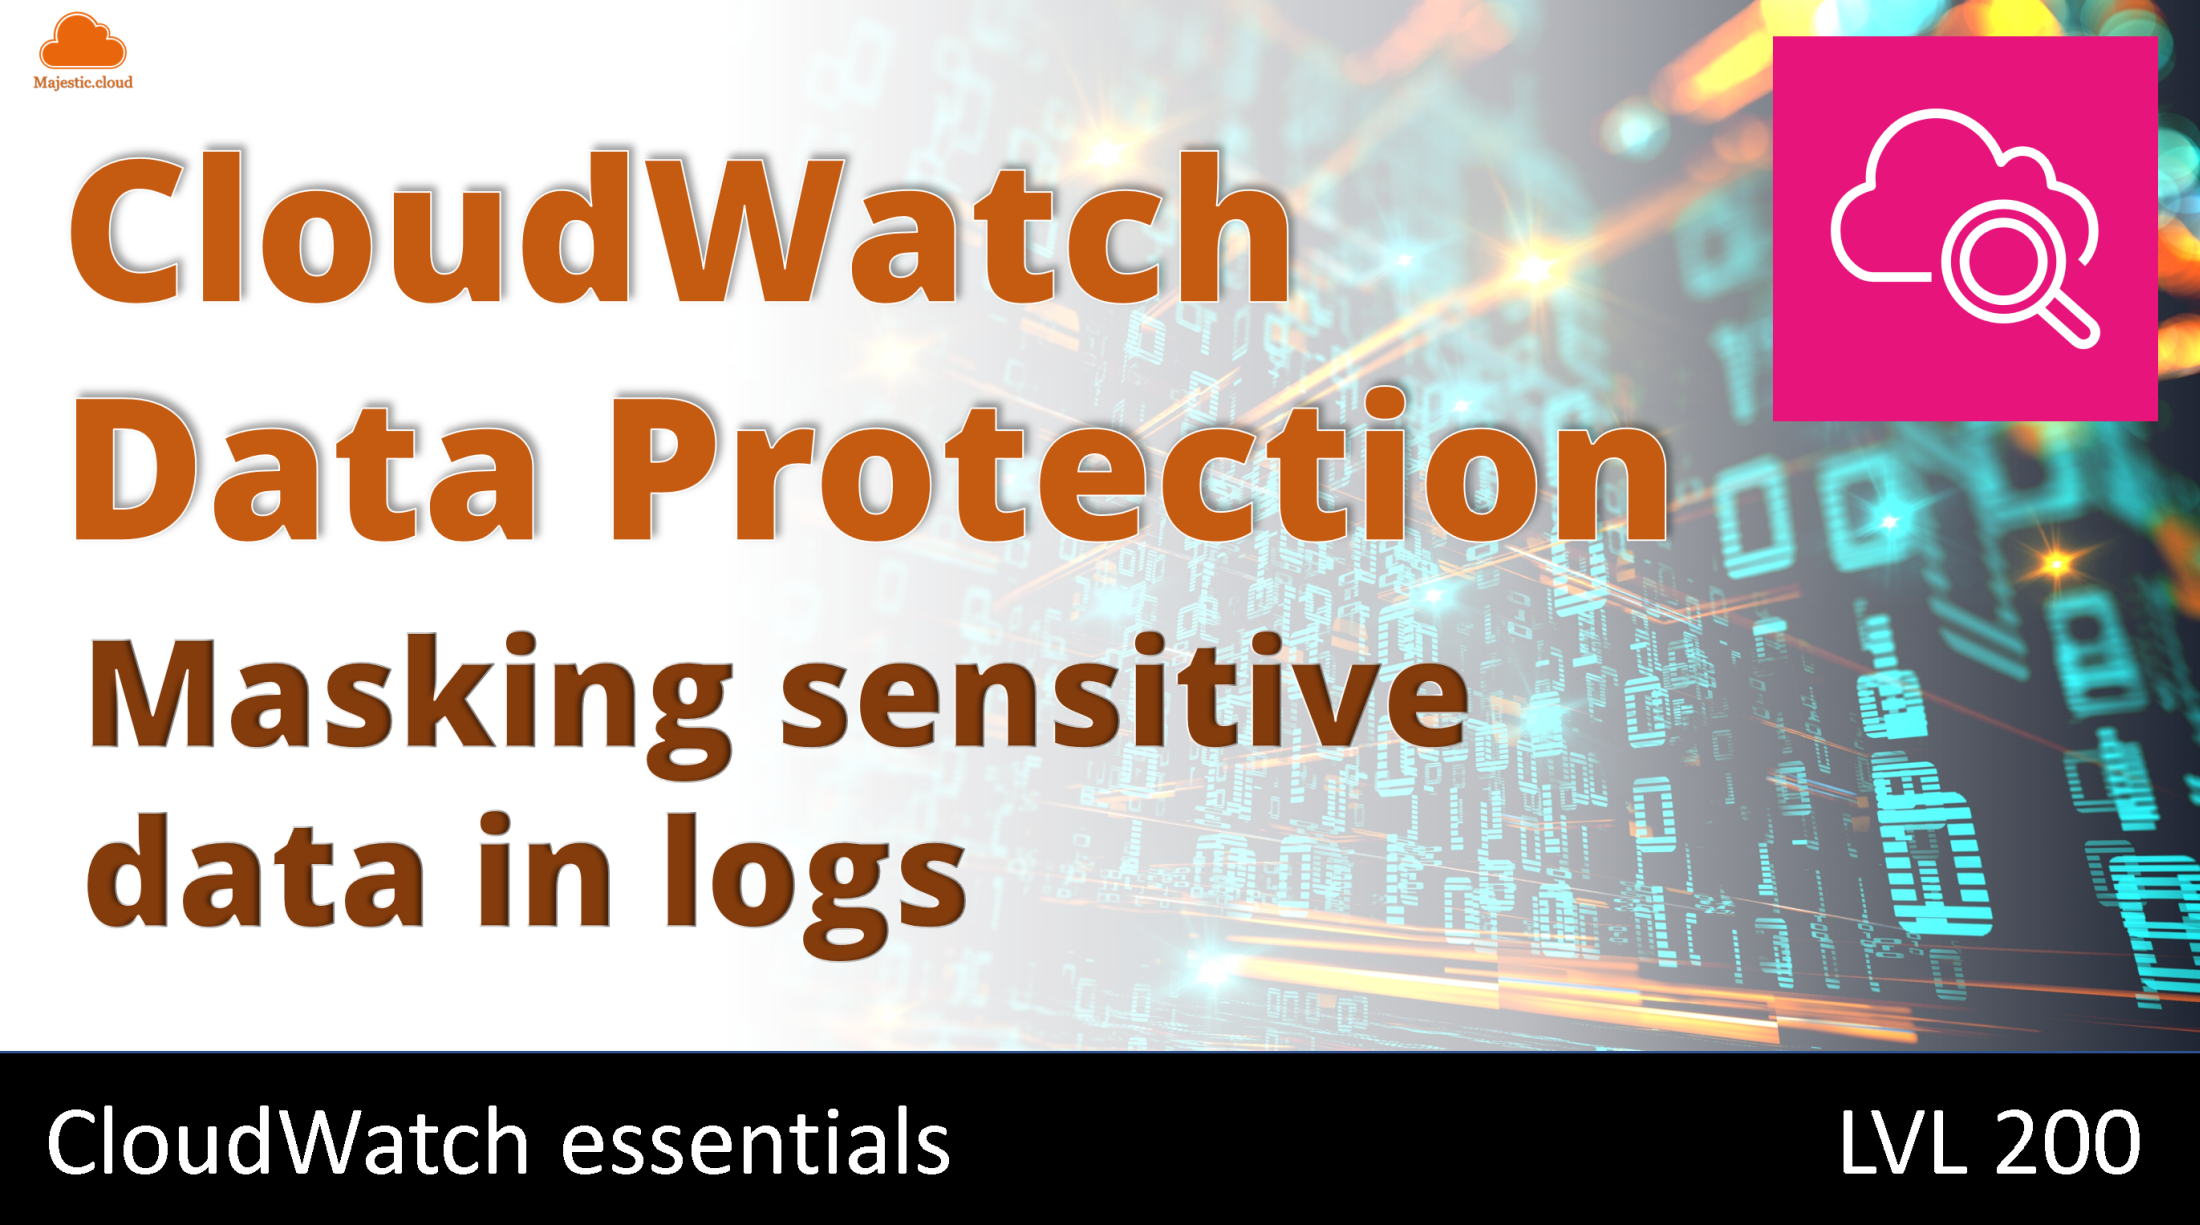 Masking sensitive data in logs with CloudWatch Data Protection